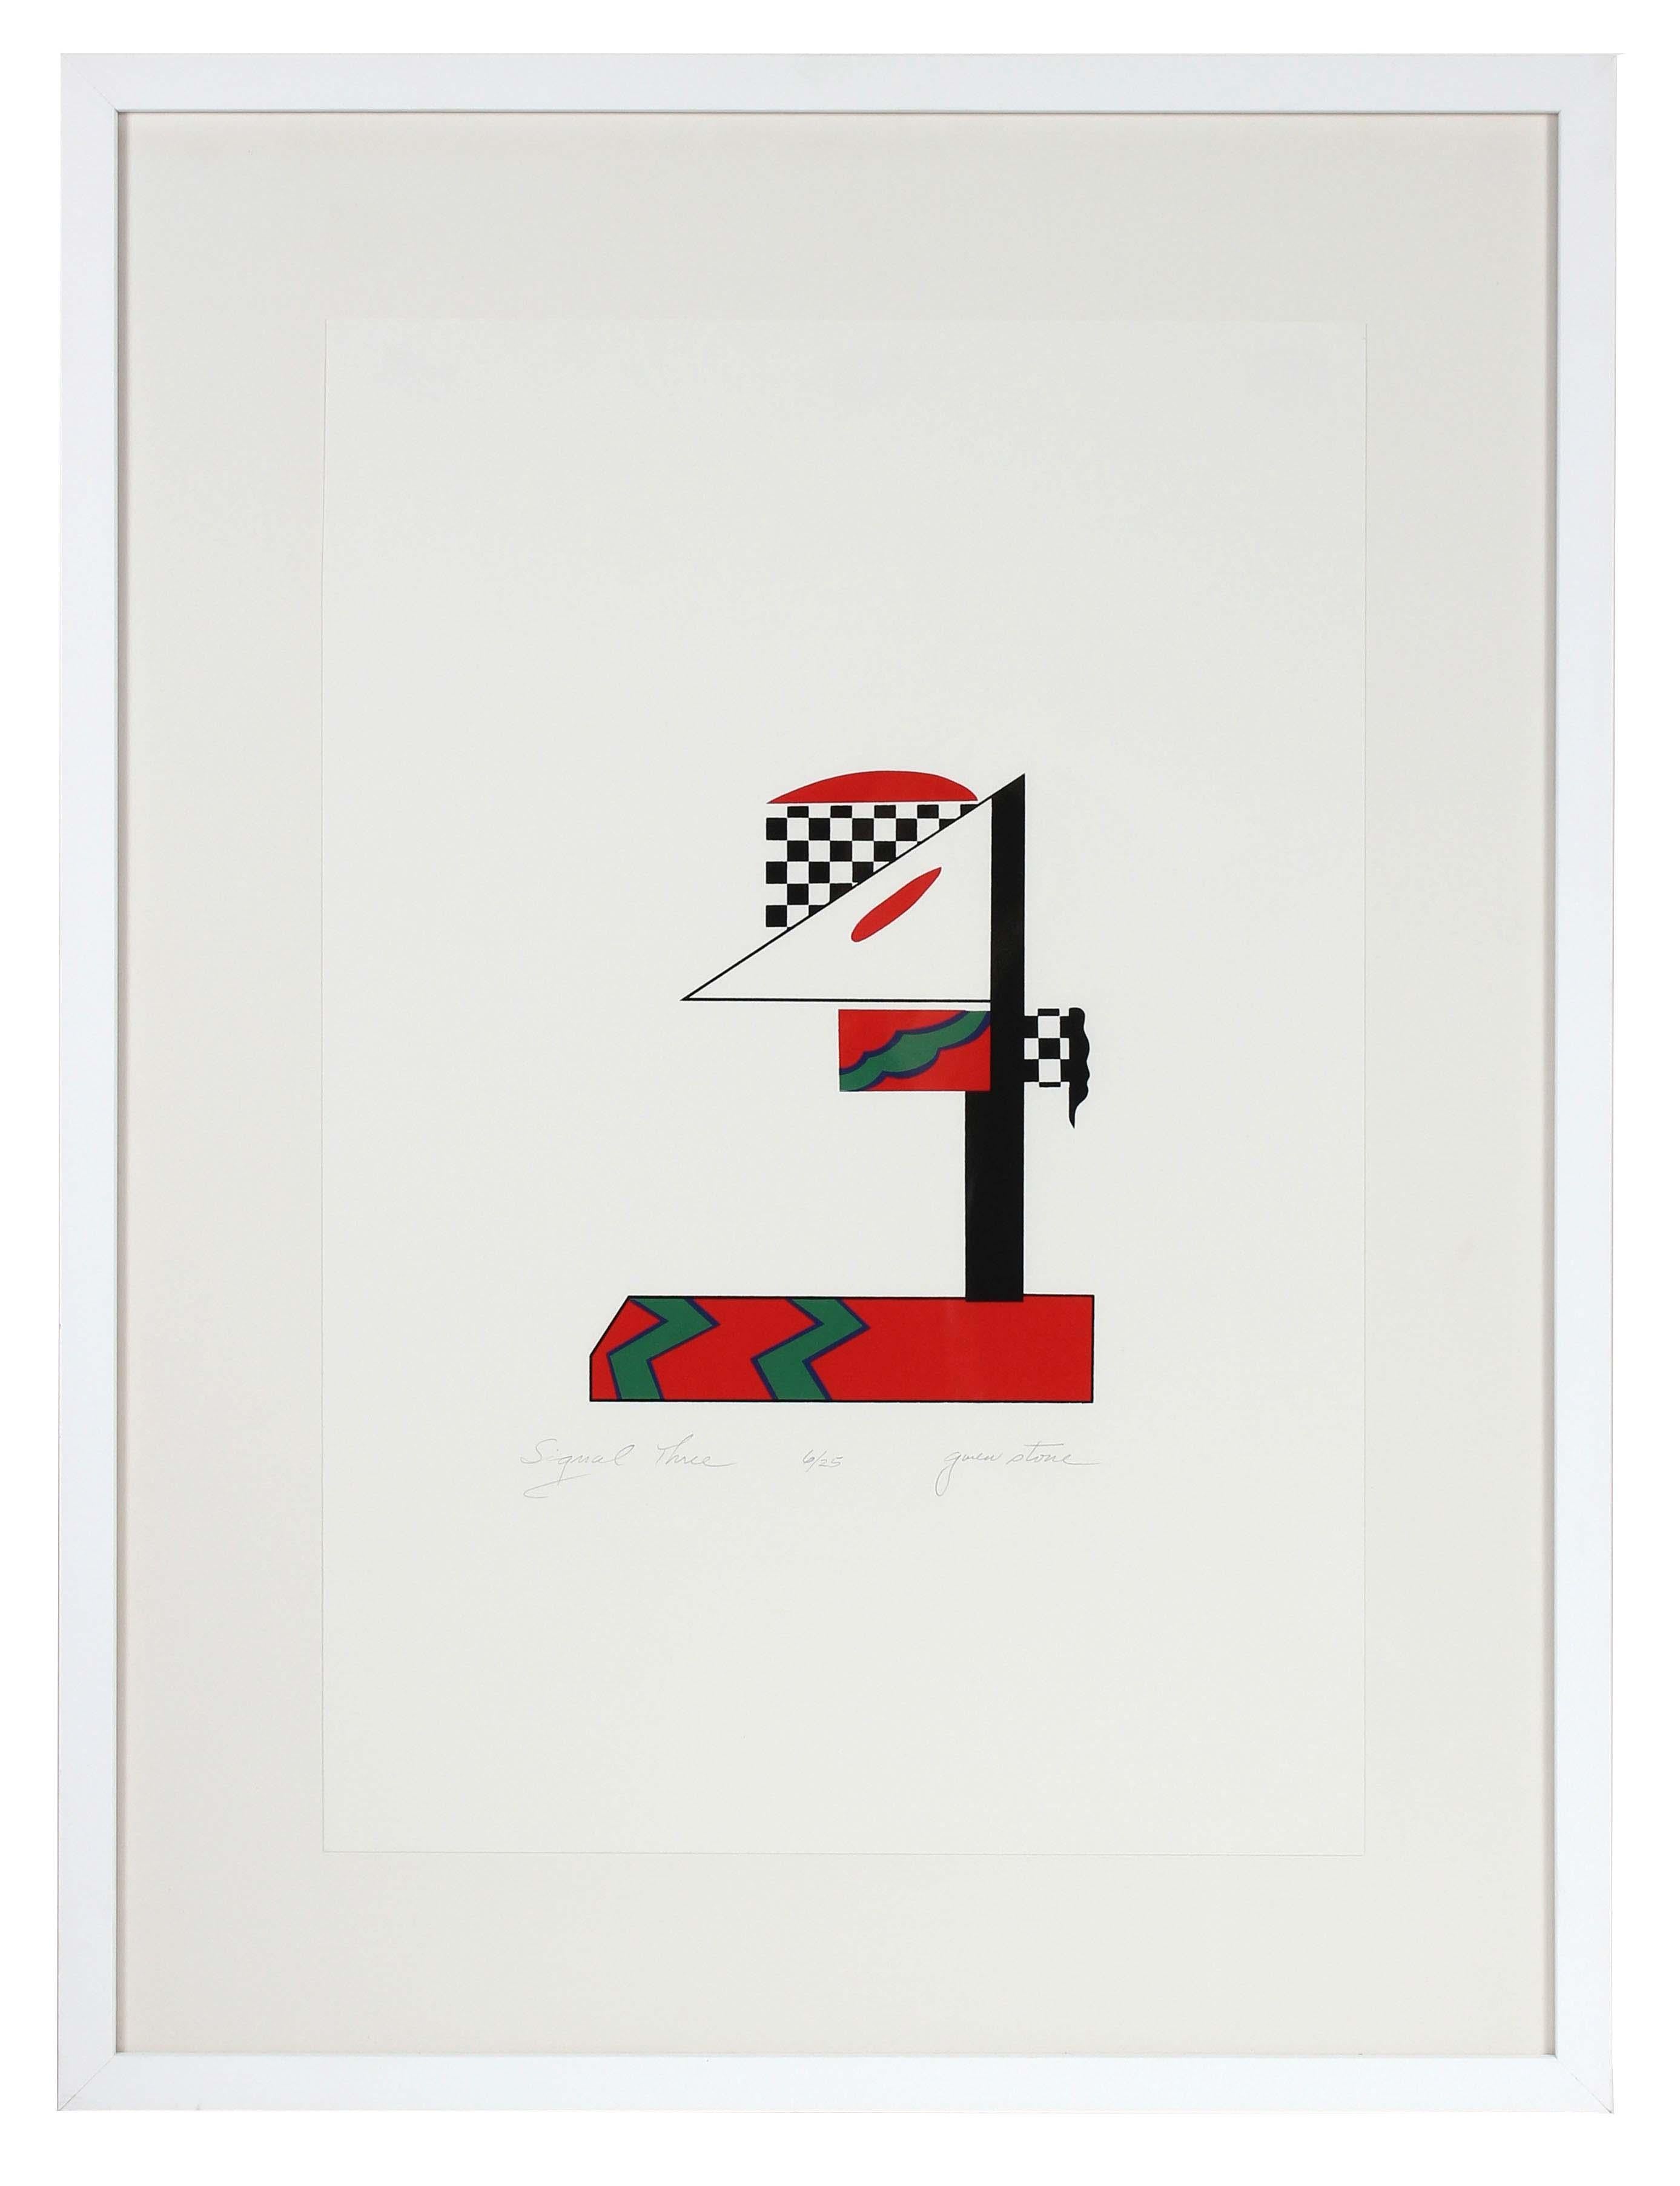 "Signal Three", 1978 Checkered Abstract Serigraph in Red, Green, Black and White